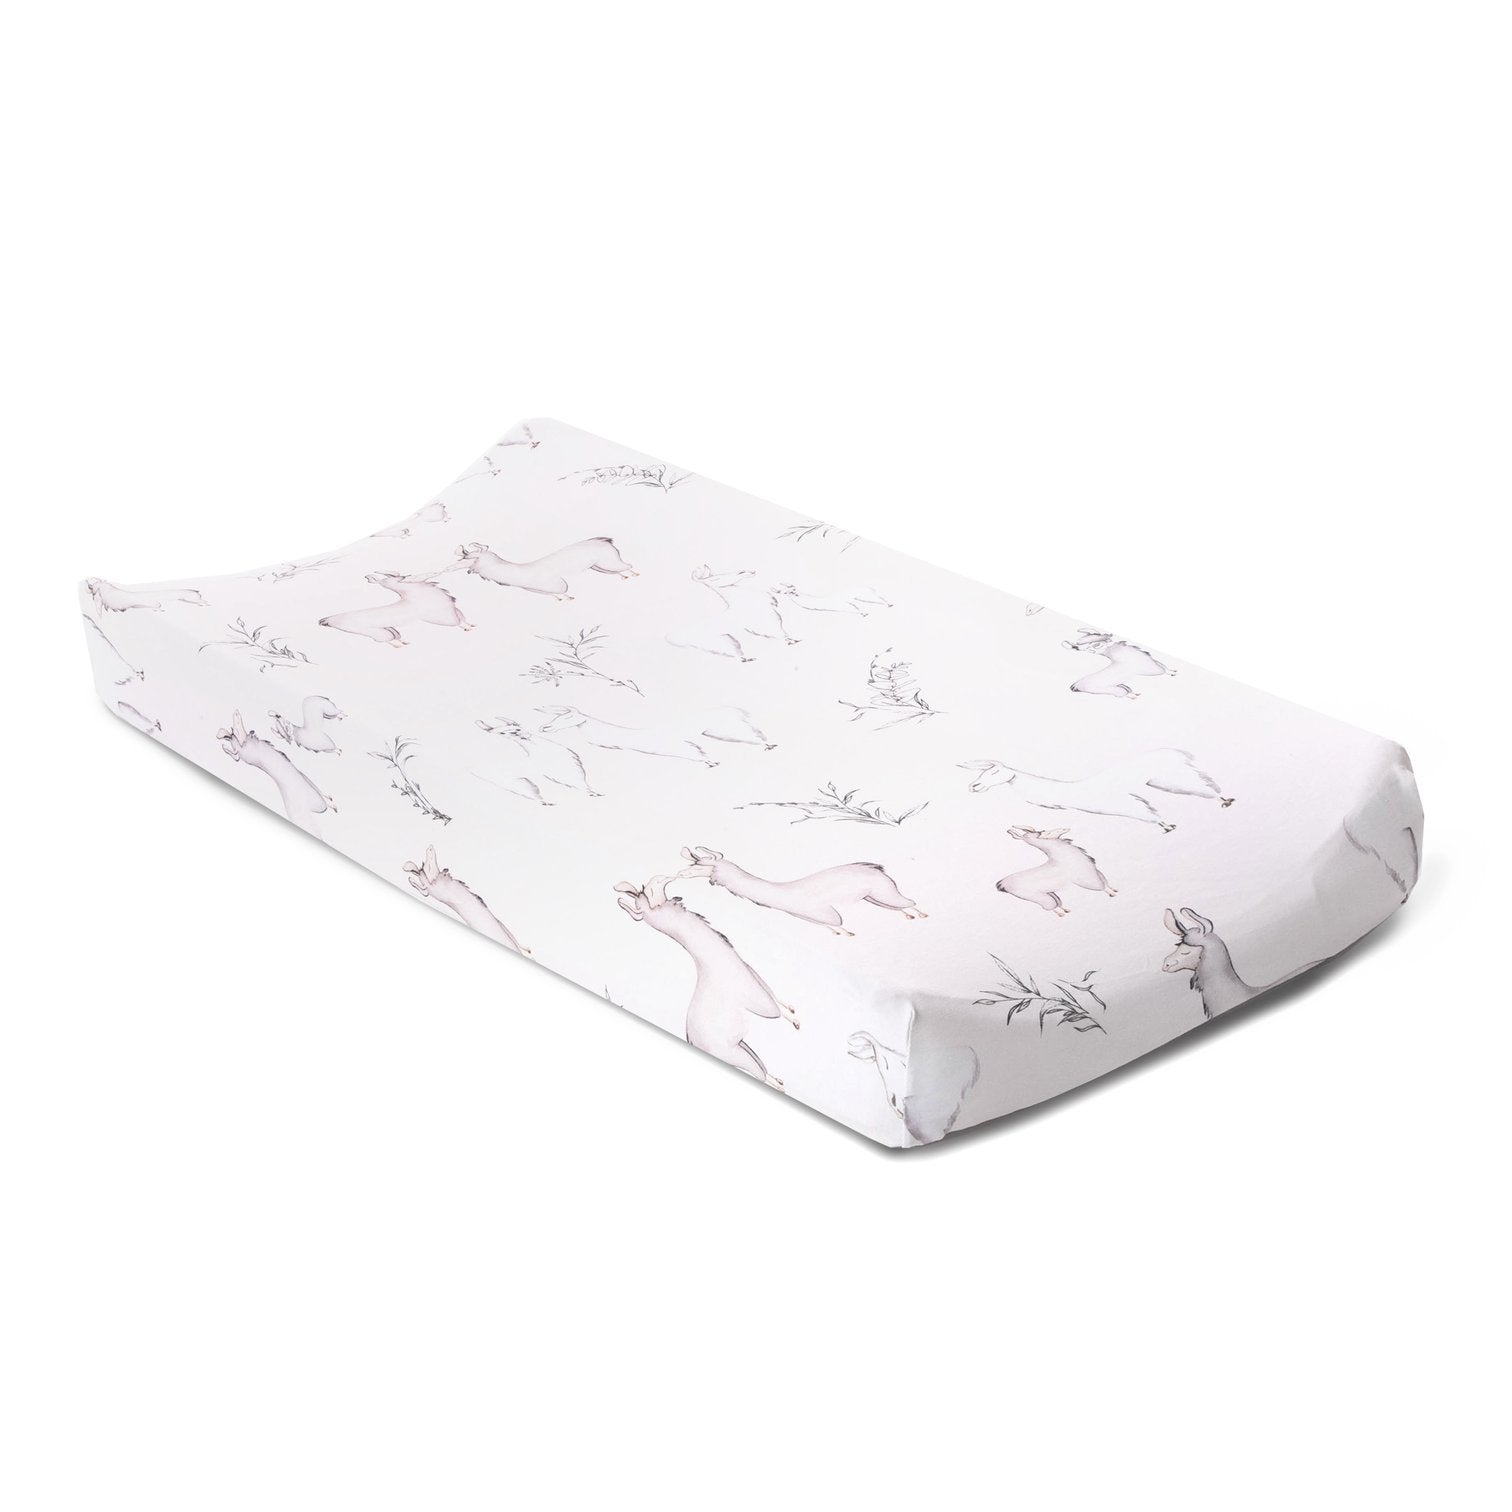 Oilo Llama Jersey Changing Pad Cover